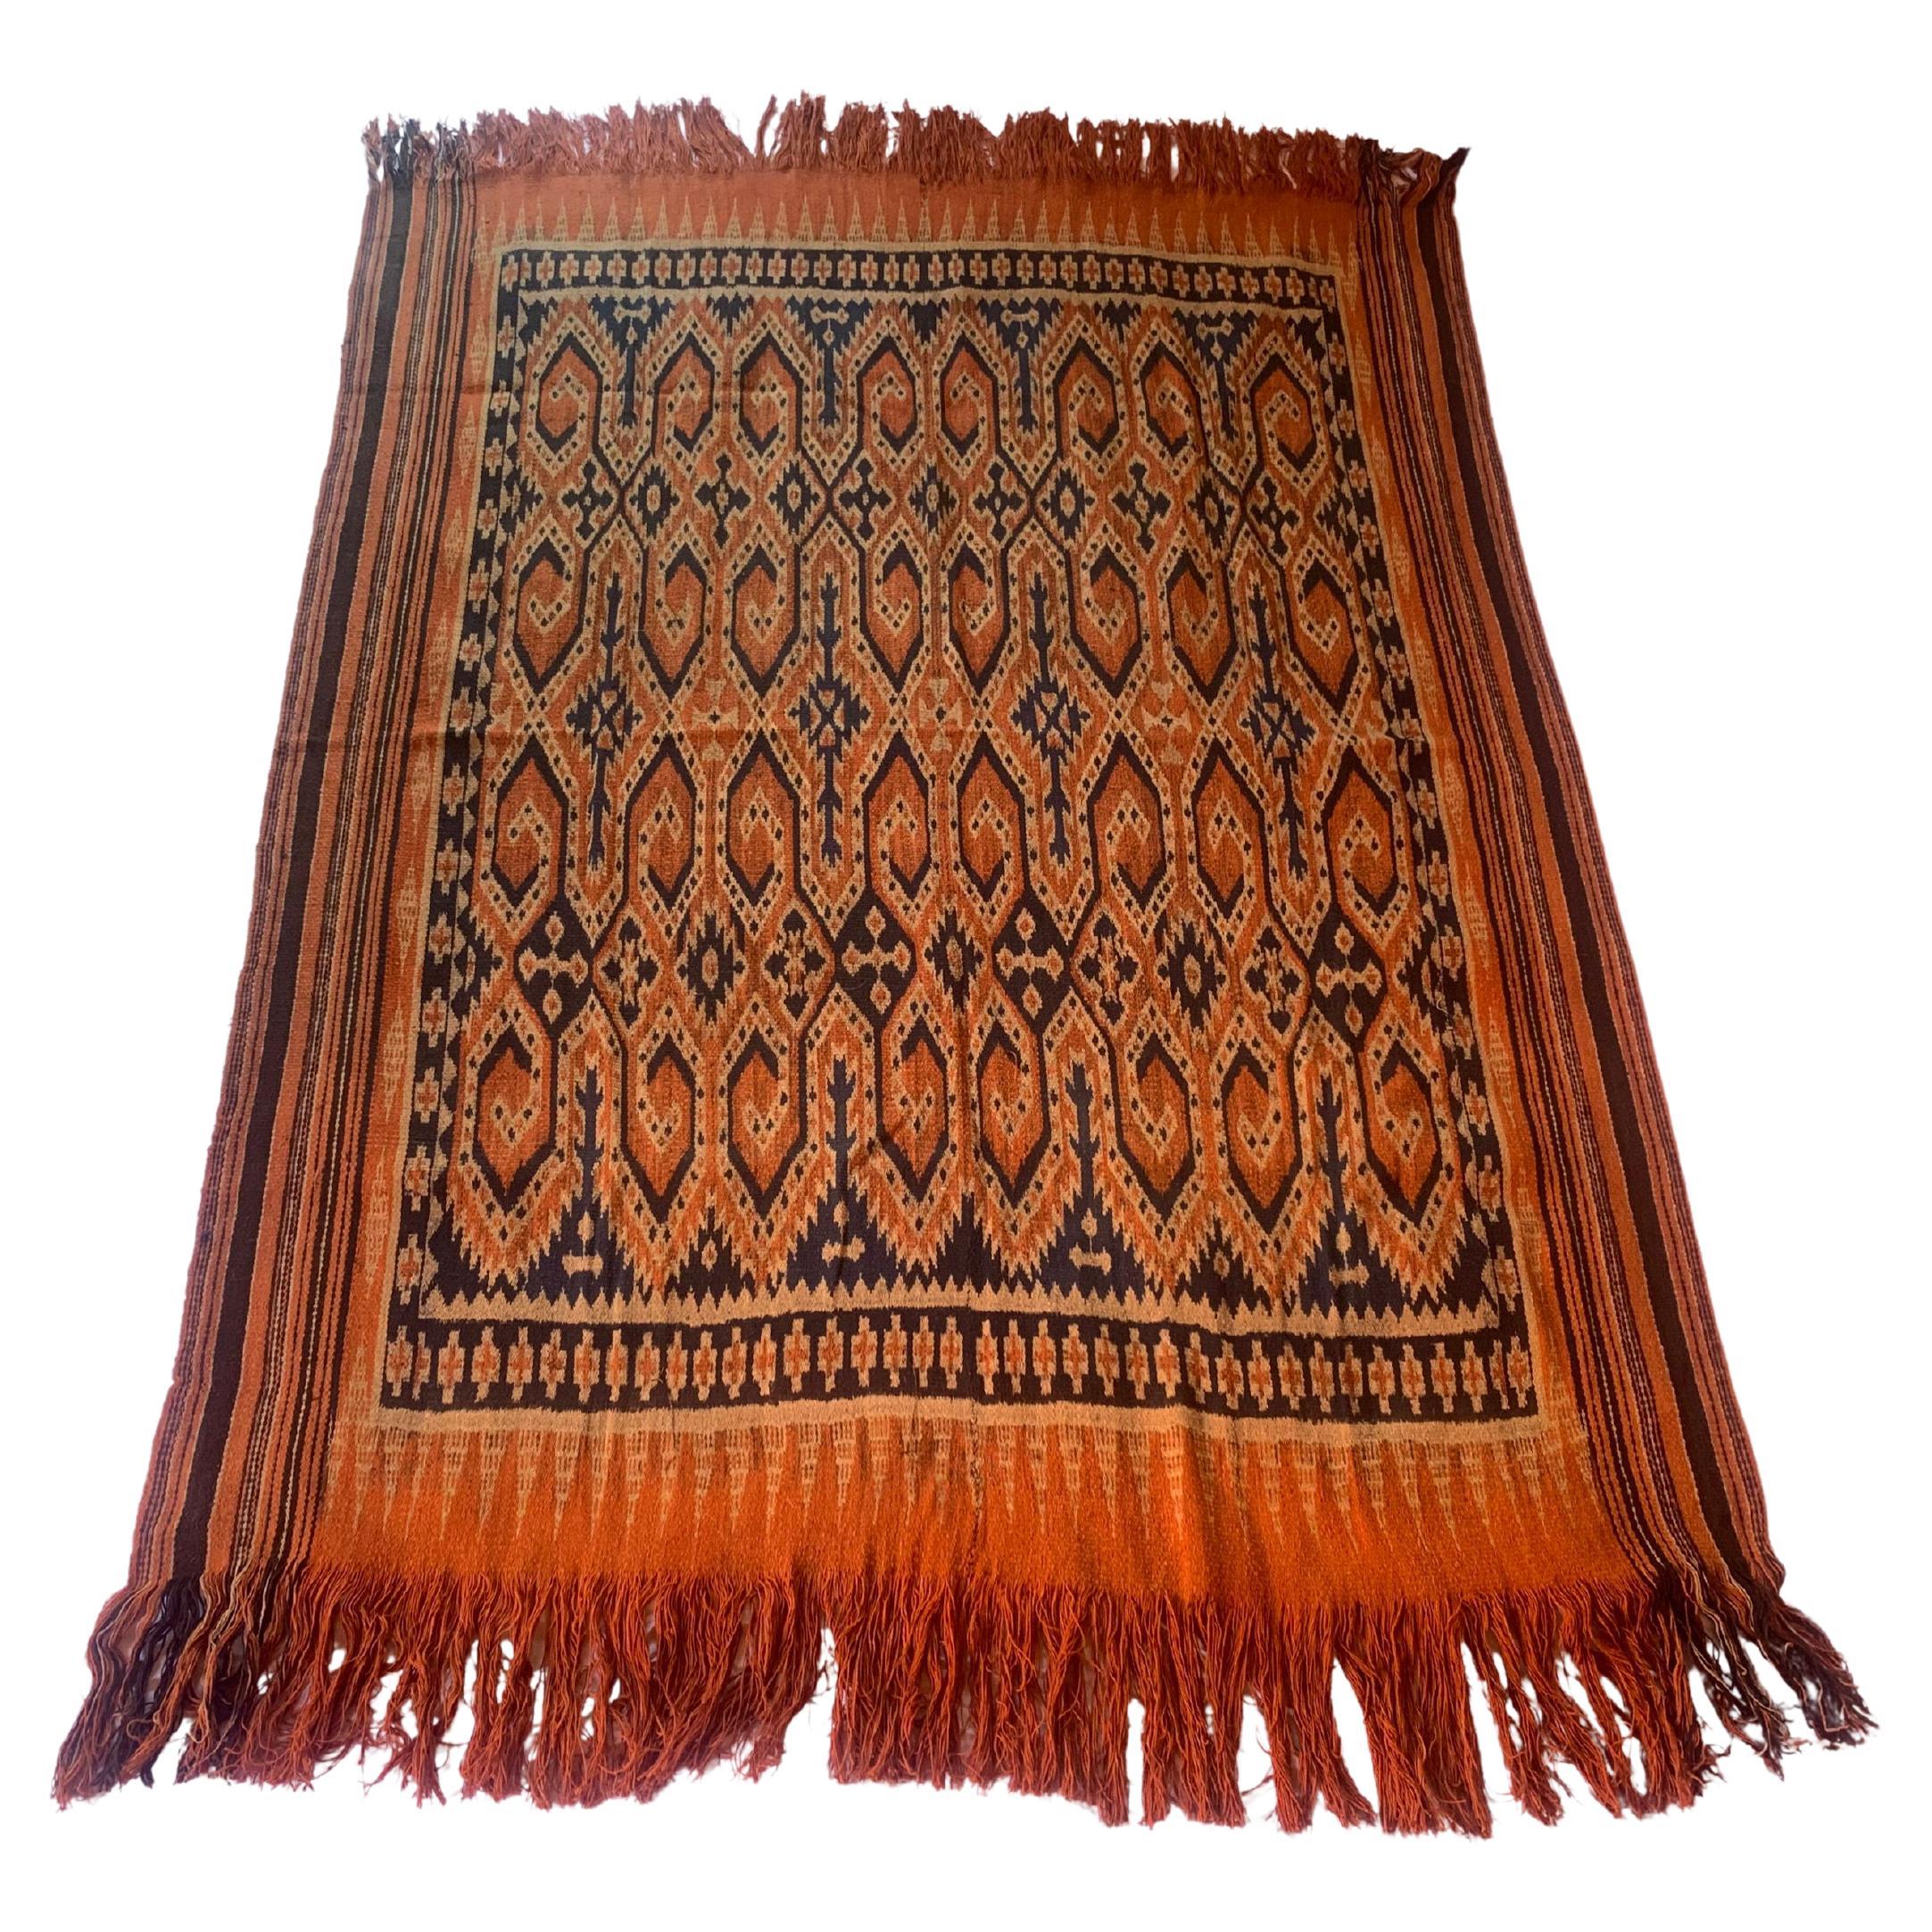 Ikat Textile from Toraja Tribe of Sulawesi with Stunning Tribal Motifs C. 1950 For Sale